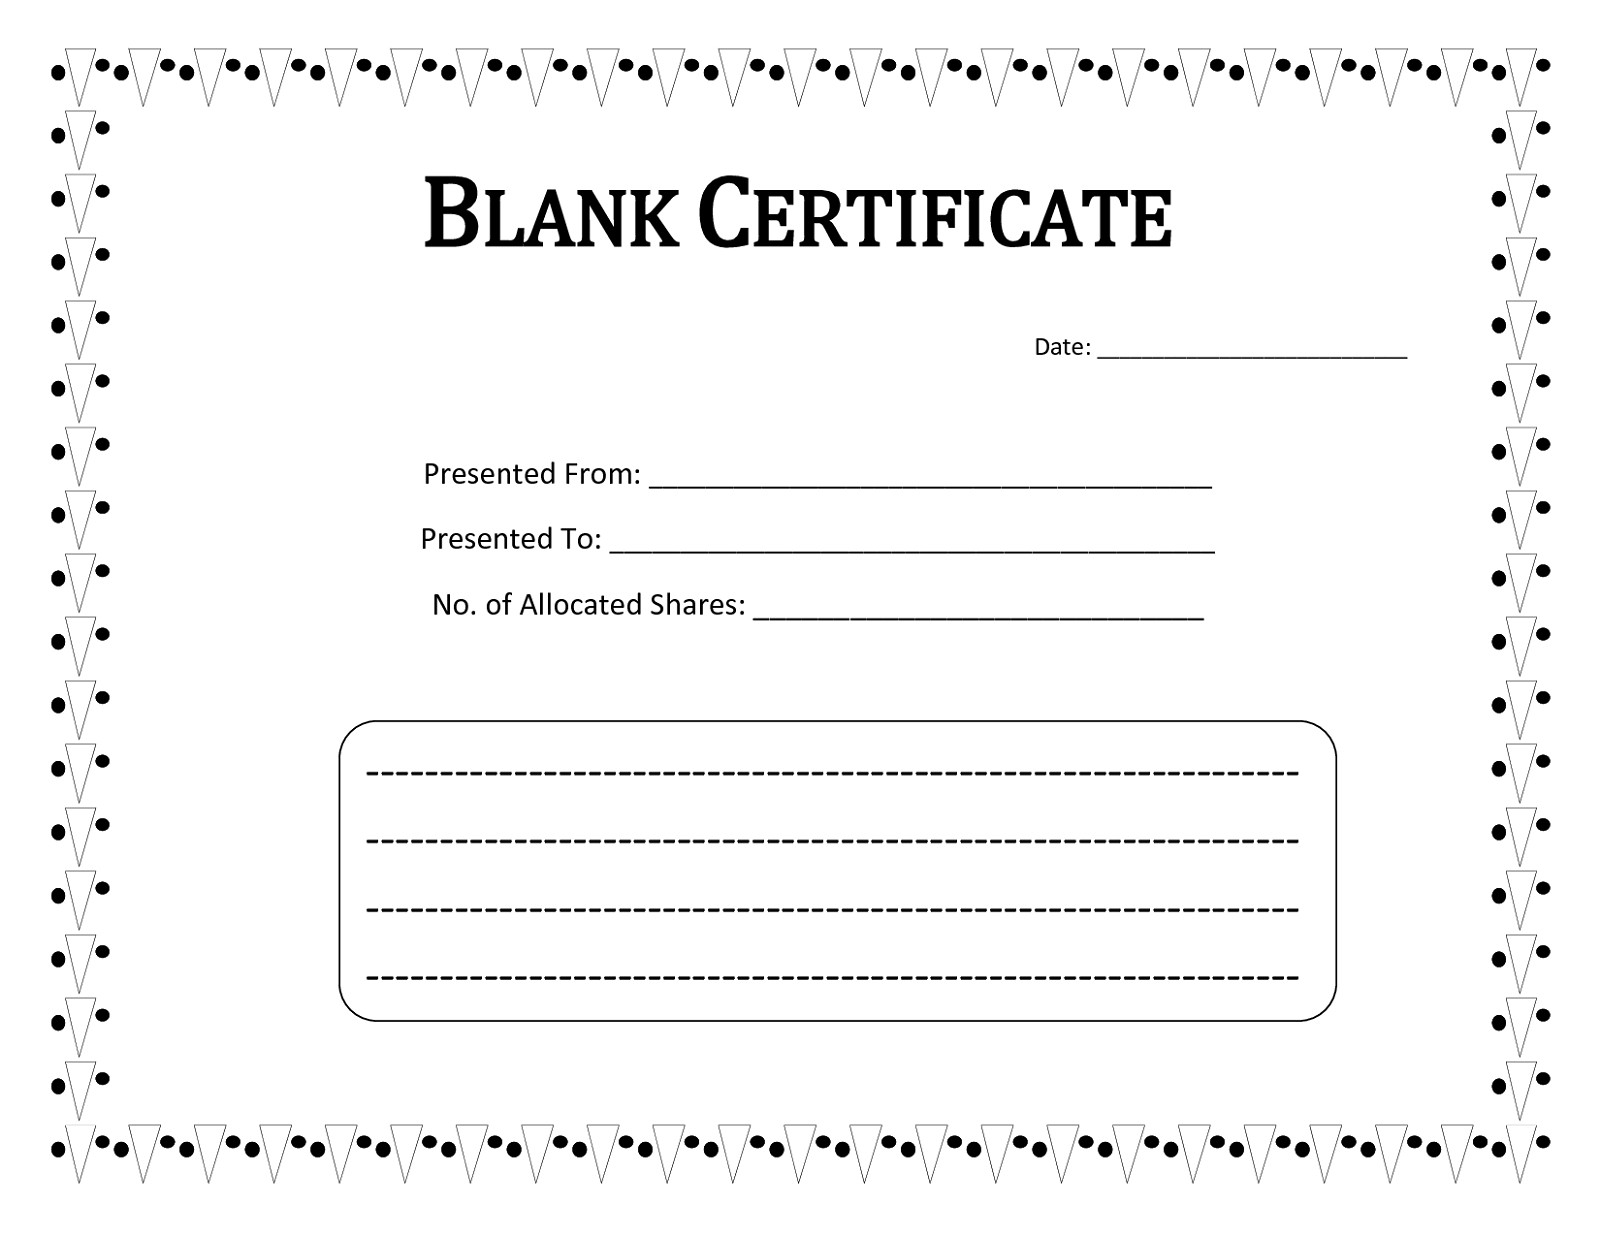 Blank Certificate Templates To Print | Activity Shelter Throughout Girl Birth Certificate Template